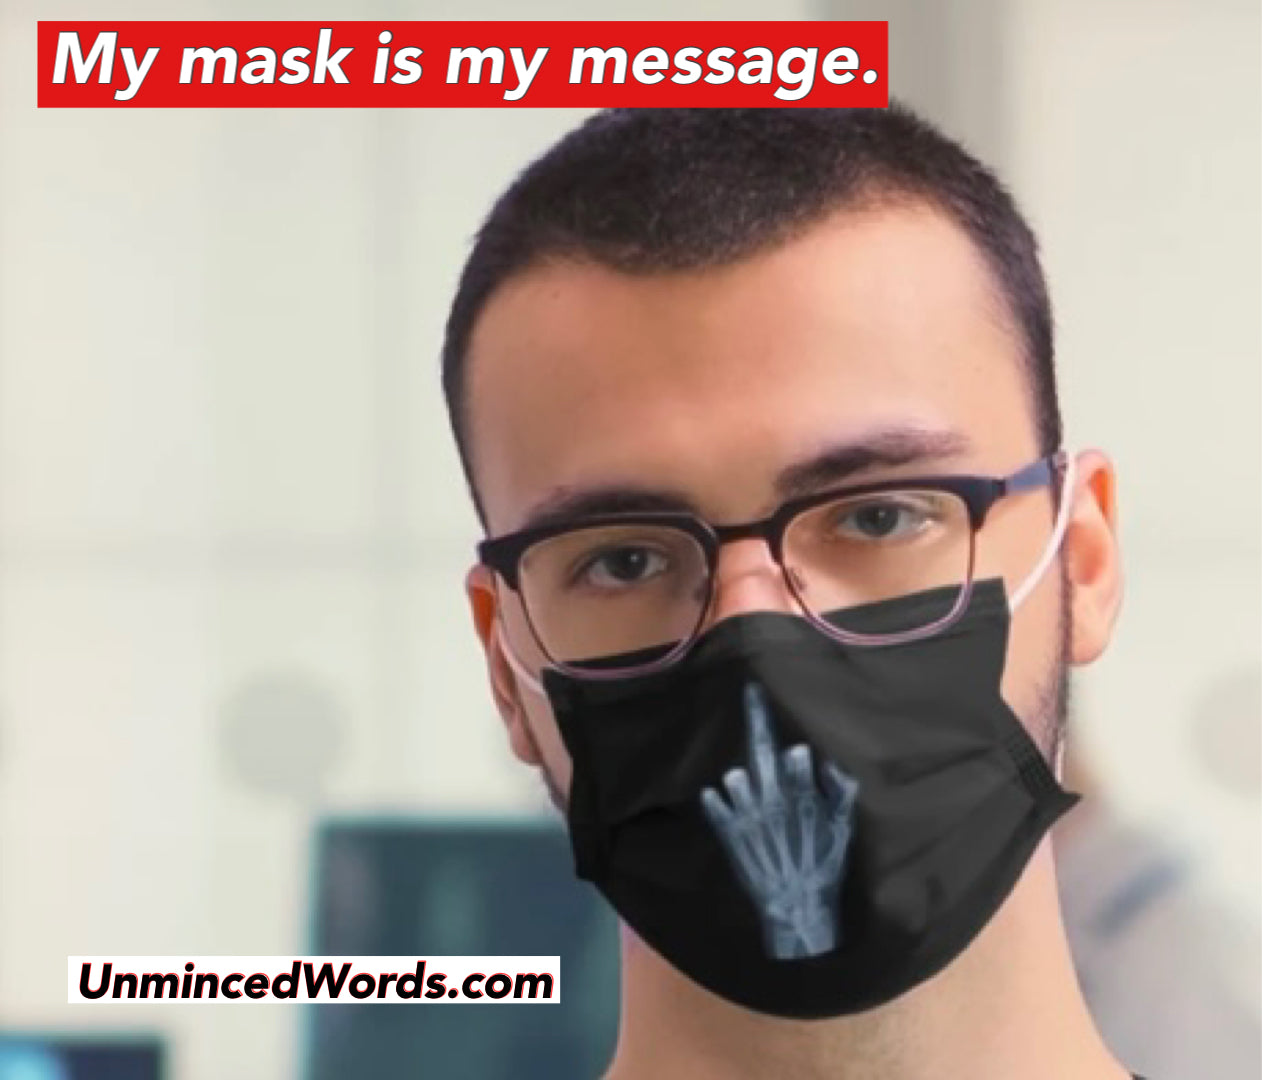 My mask is my message